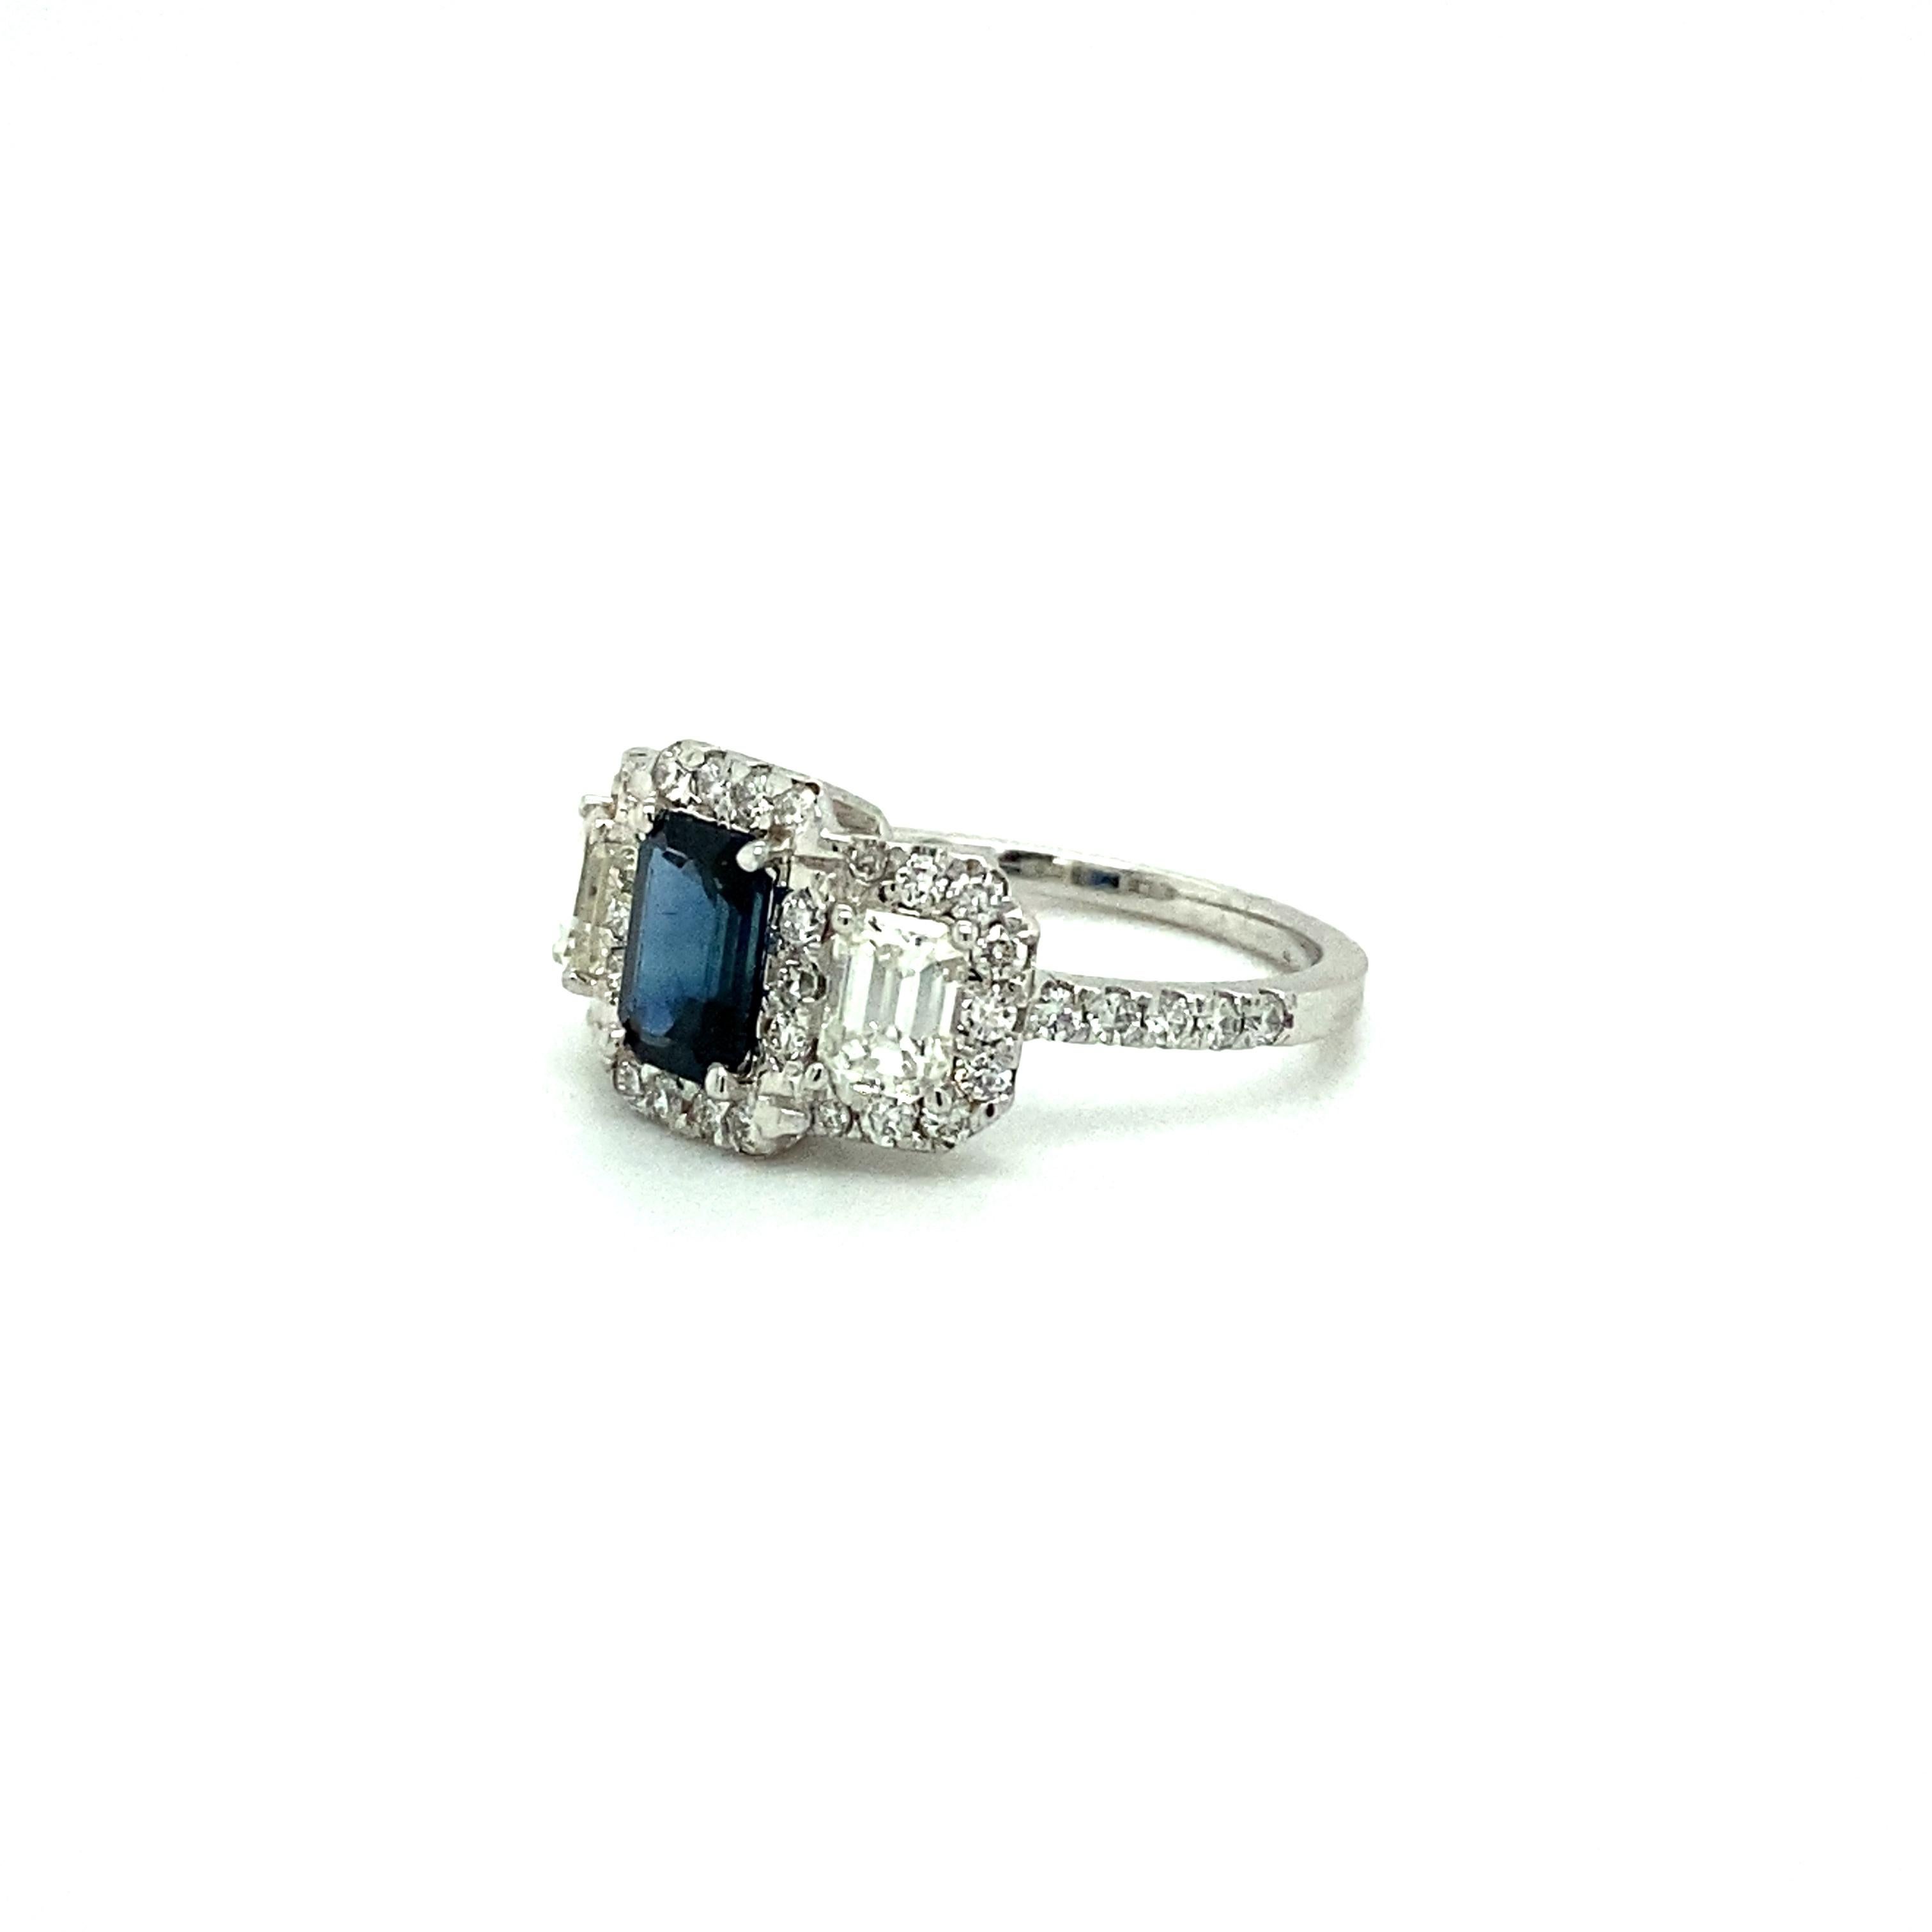 Offered here is an Emerald Cut Sapphire and Diamond Ring created and hallmarked by us, hallmarked Kozi 18k.
Designed and handmade in our boutique atelier in Miami, Florida.
Featuring 1 natural earth mind blue emerald cut sapphire, weighing 0.85